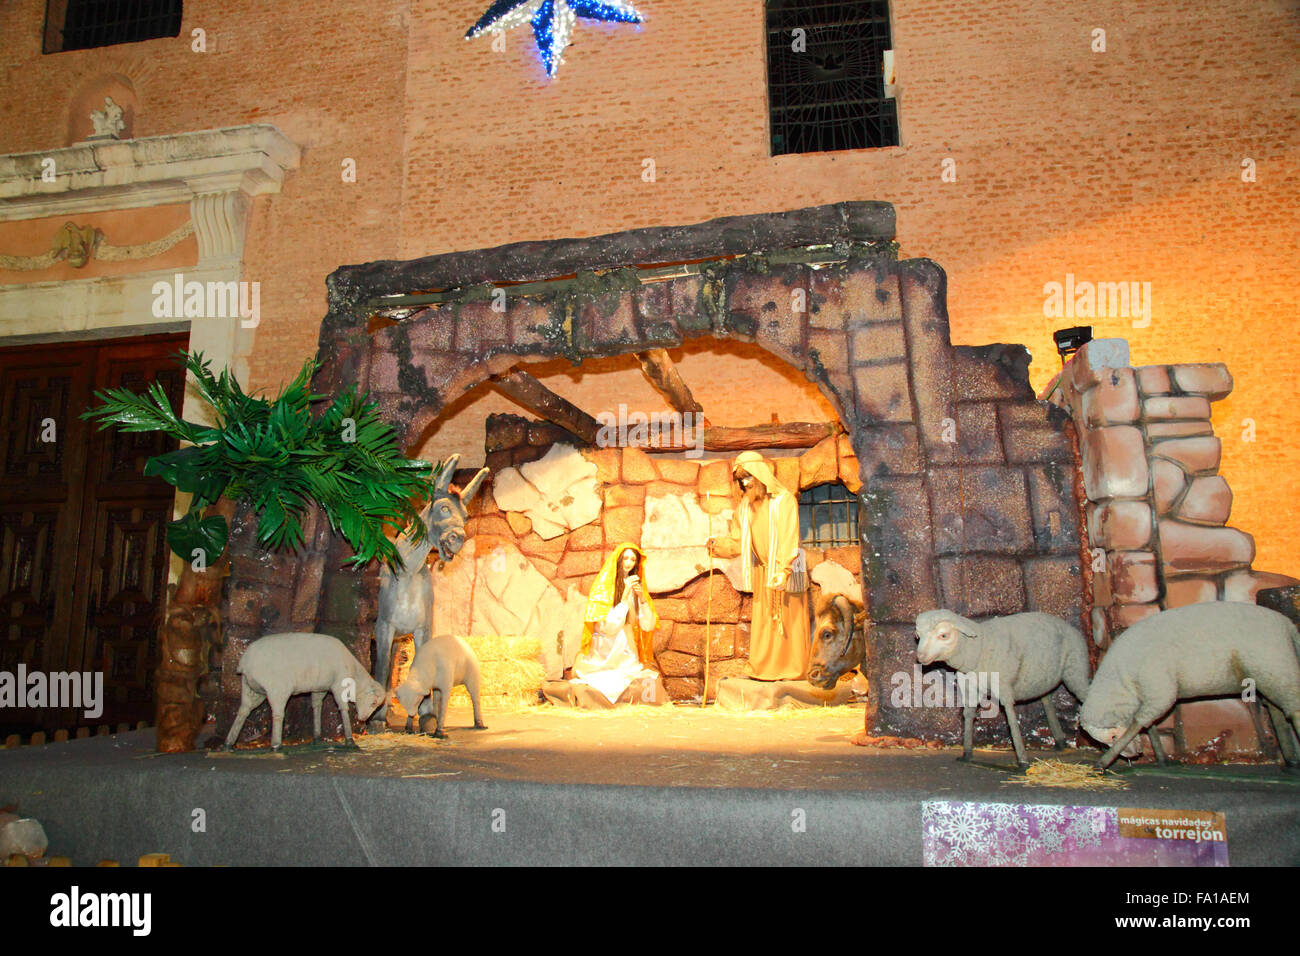 Torrejon de Ardoz, Spain 19th December 2015: A life sized nativity scene or belen in the main square next to the church in Torrejon de Ardoz, a town about 20km from Madrid. Every year the town is elaborately decorated for Christmas with lights and the main square filled with attractions for children and families. Credit:  James Brunker/Alamy Live News Stock Photo